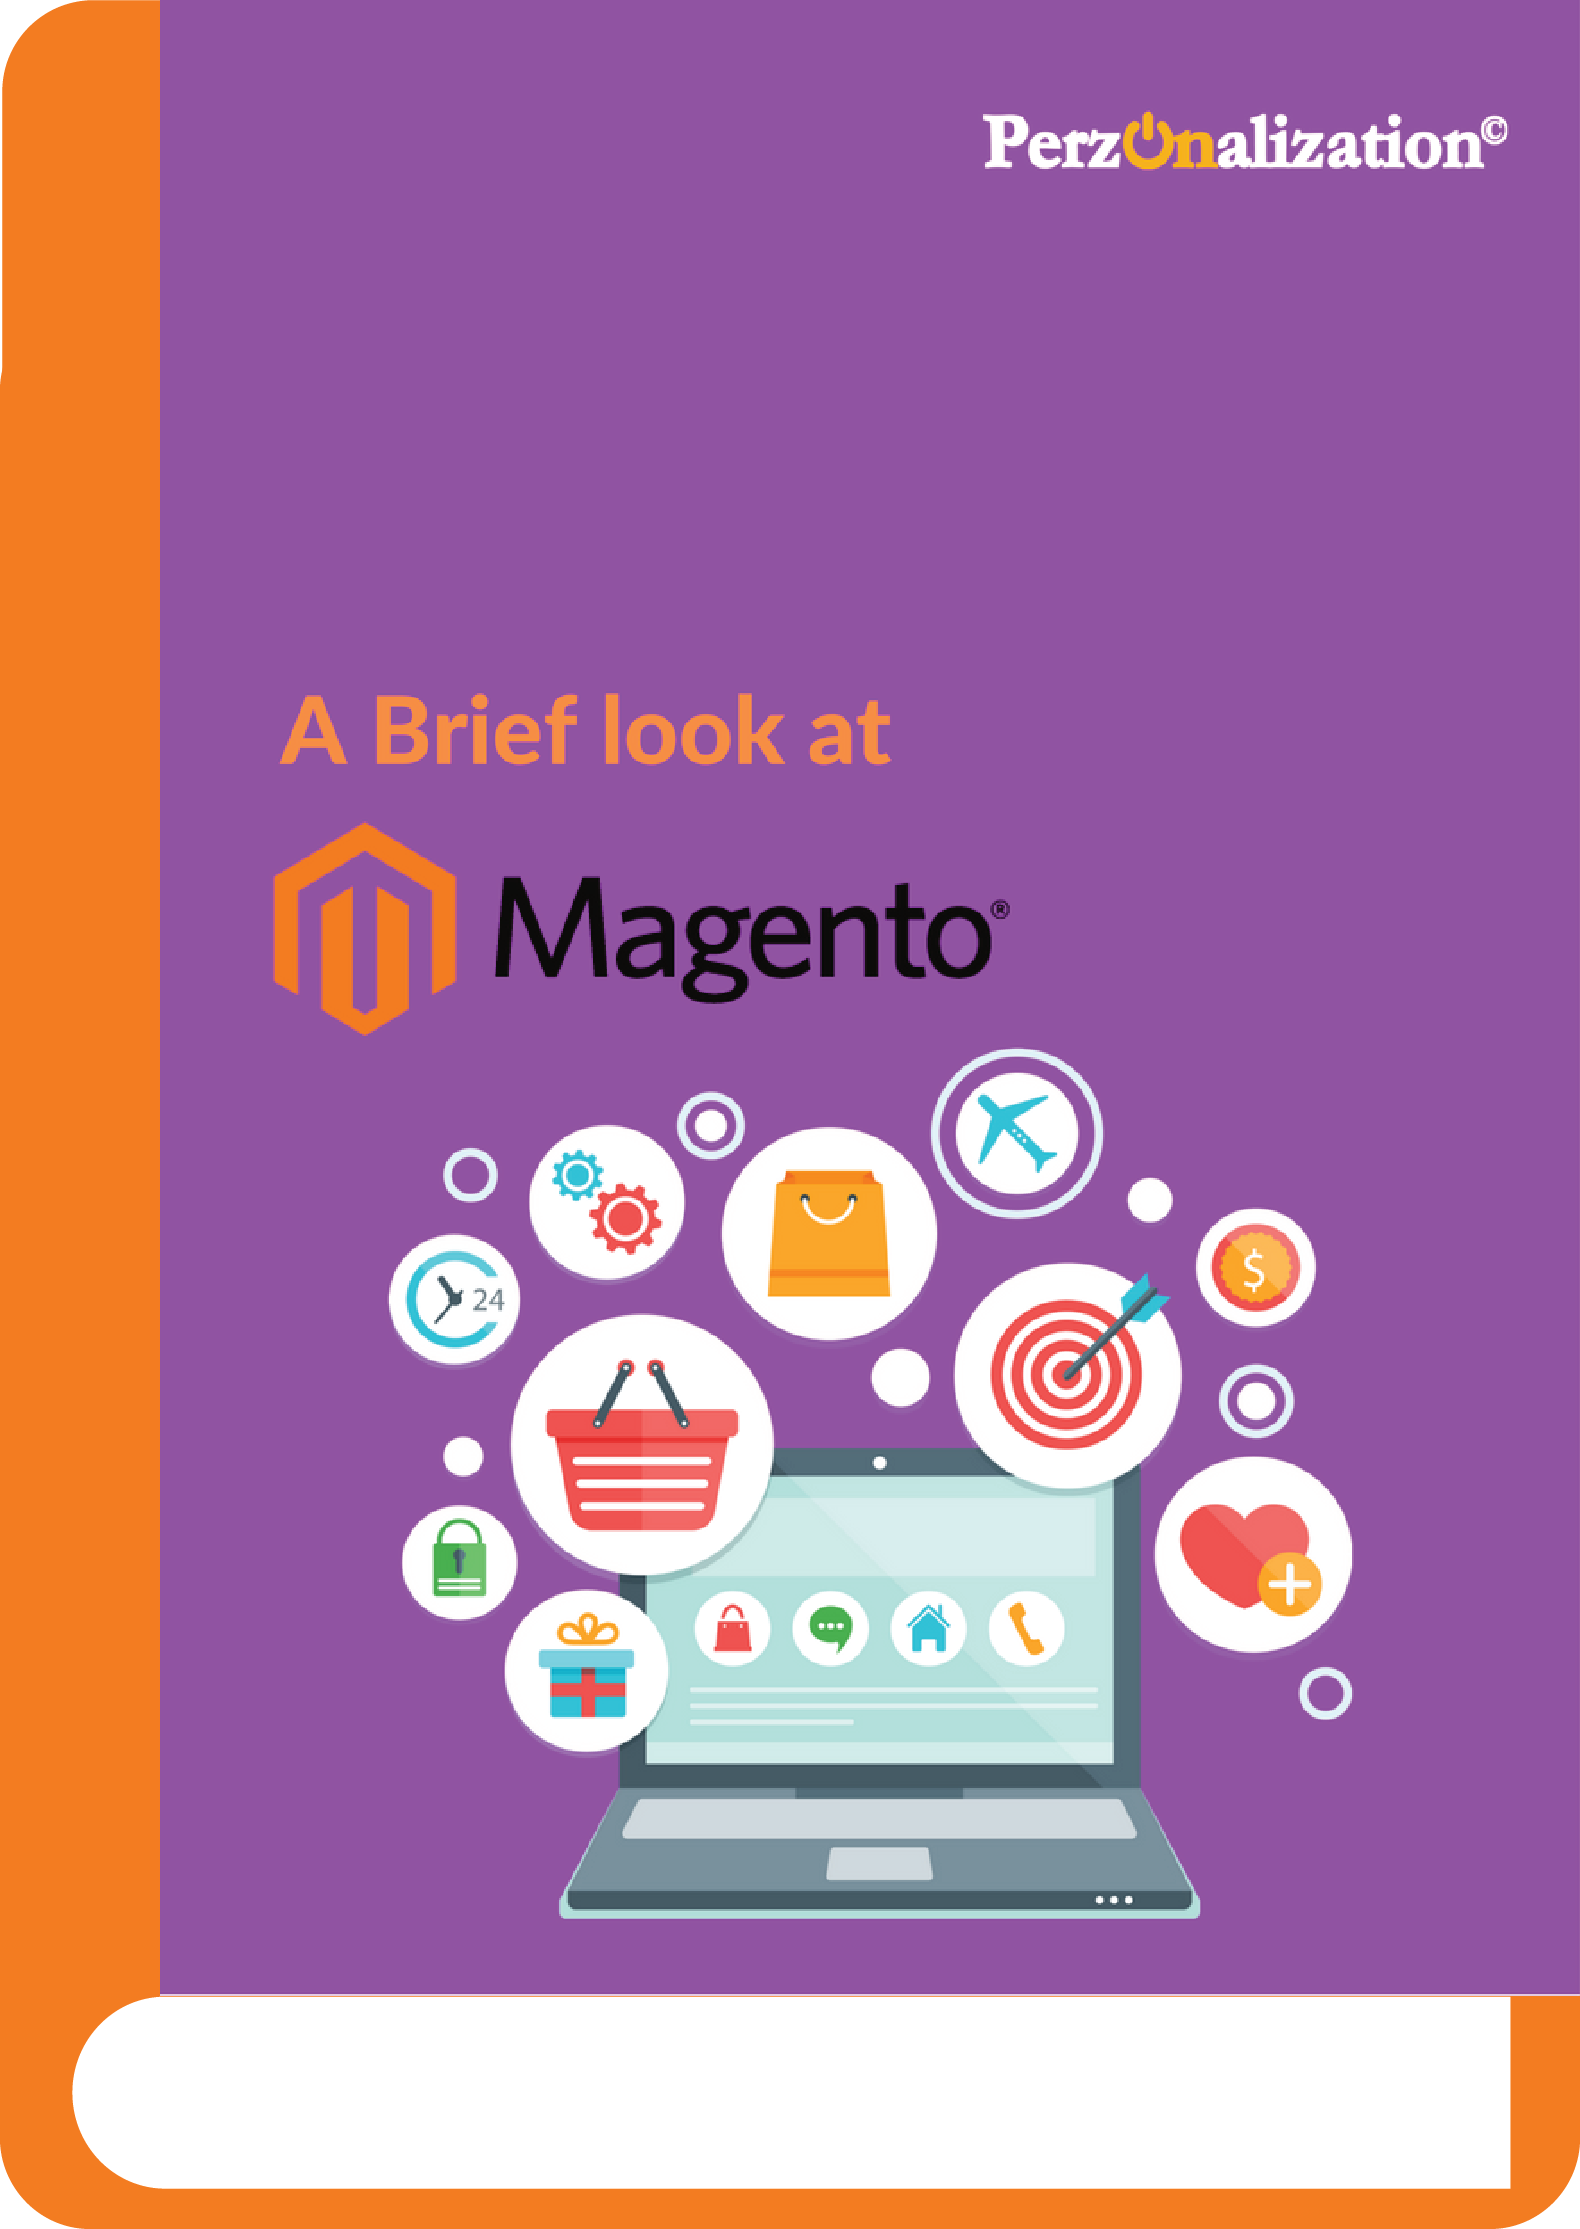 Magento is the most used and well-known AeCommerce platform among SMBs. It also adds value via extensions that go a long way in enriching the experience.